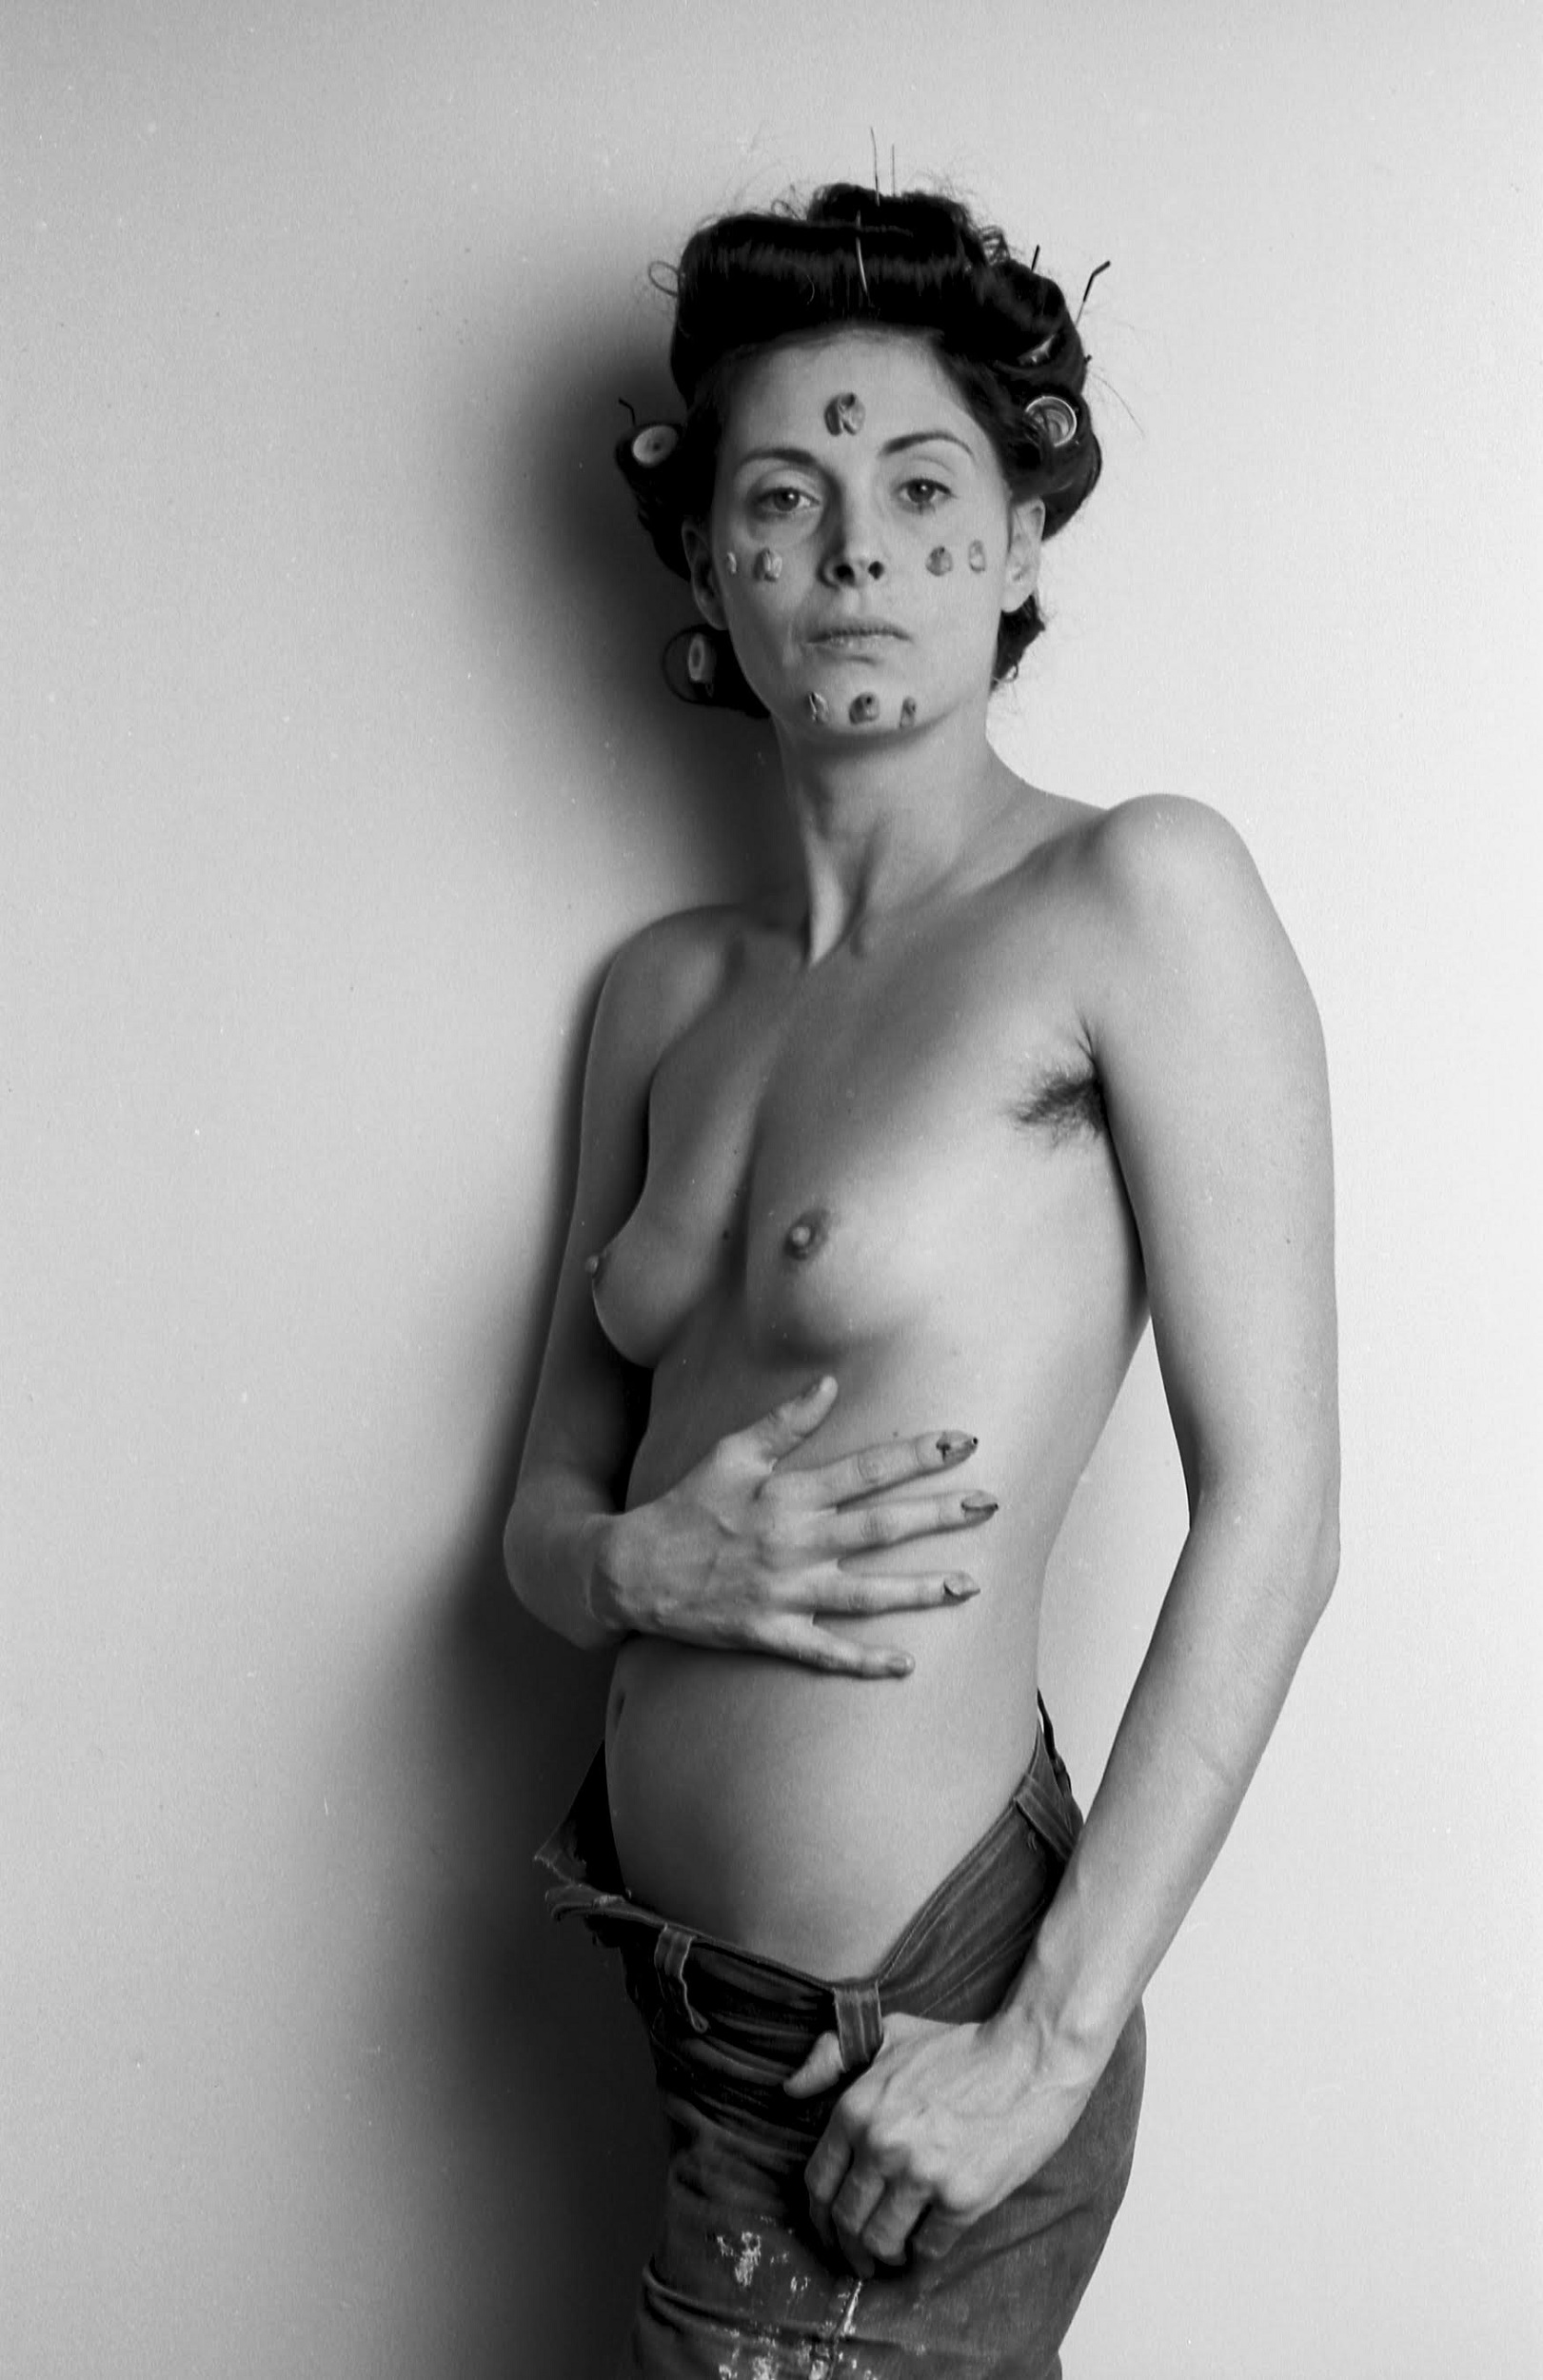 Black-and-white photograph of a woman nude from the waist up, with chunks of chewed bubble gum attached to her face and torso